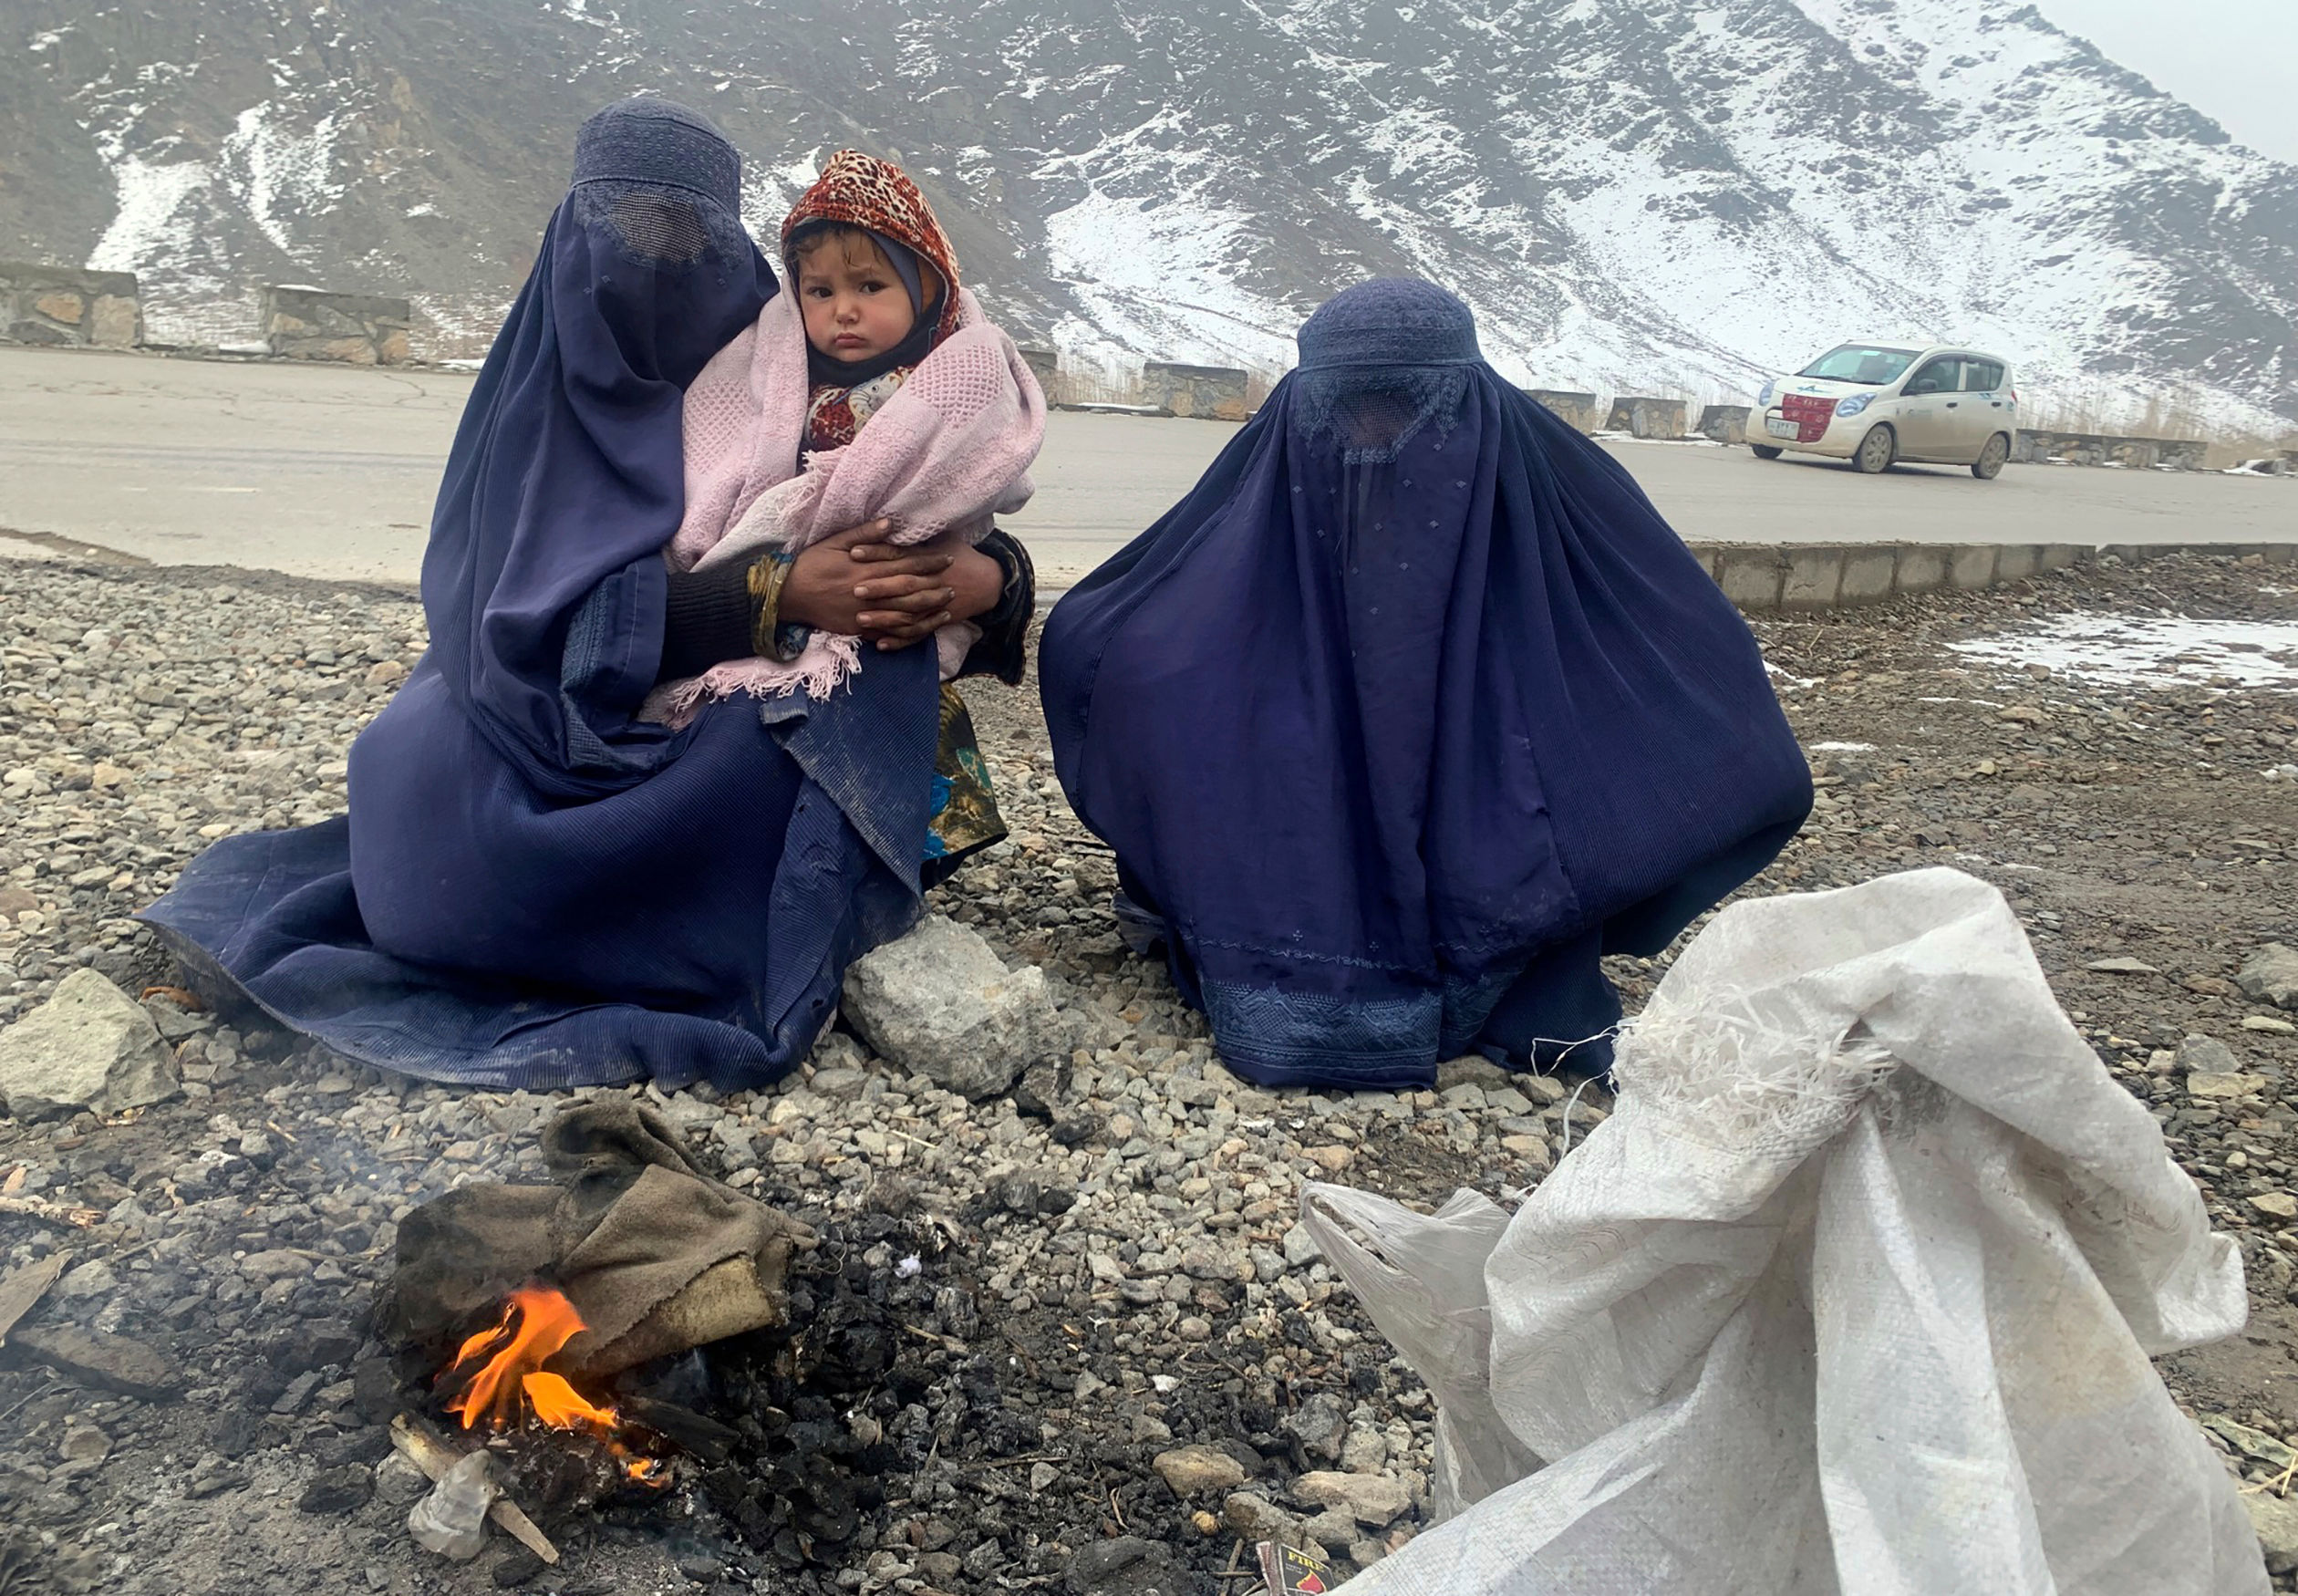 In freezing Afghanistan, aid workers rush to save millions